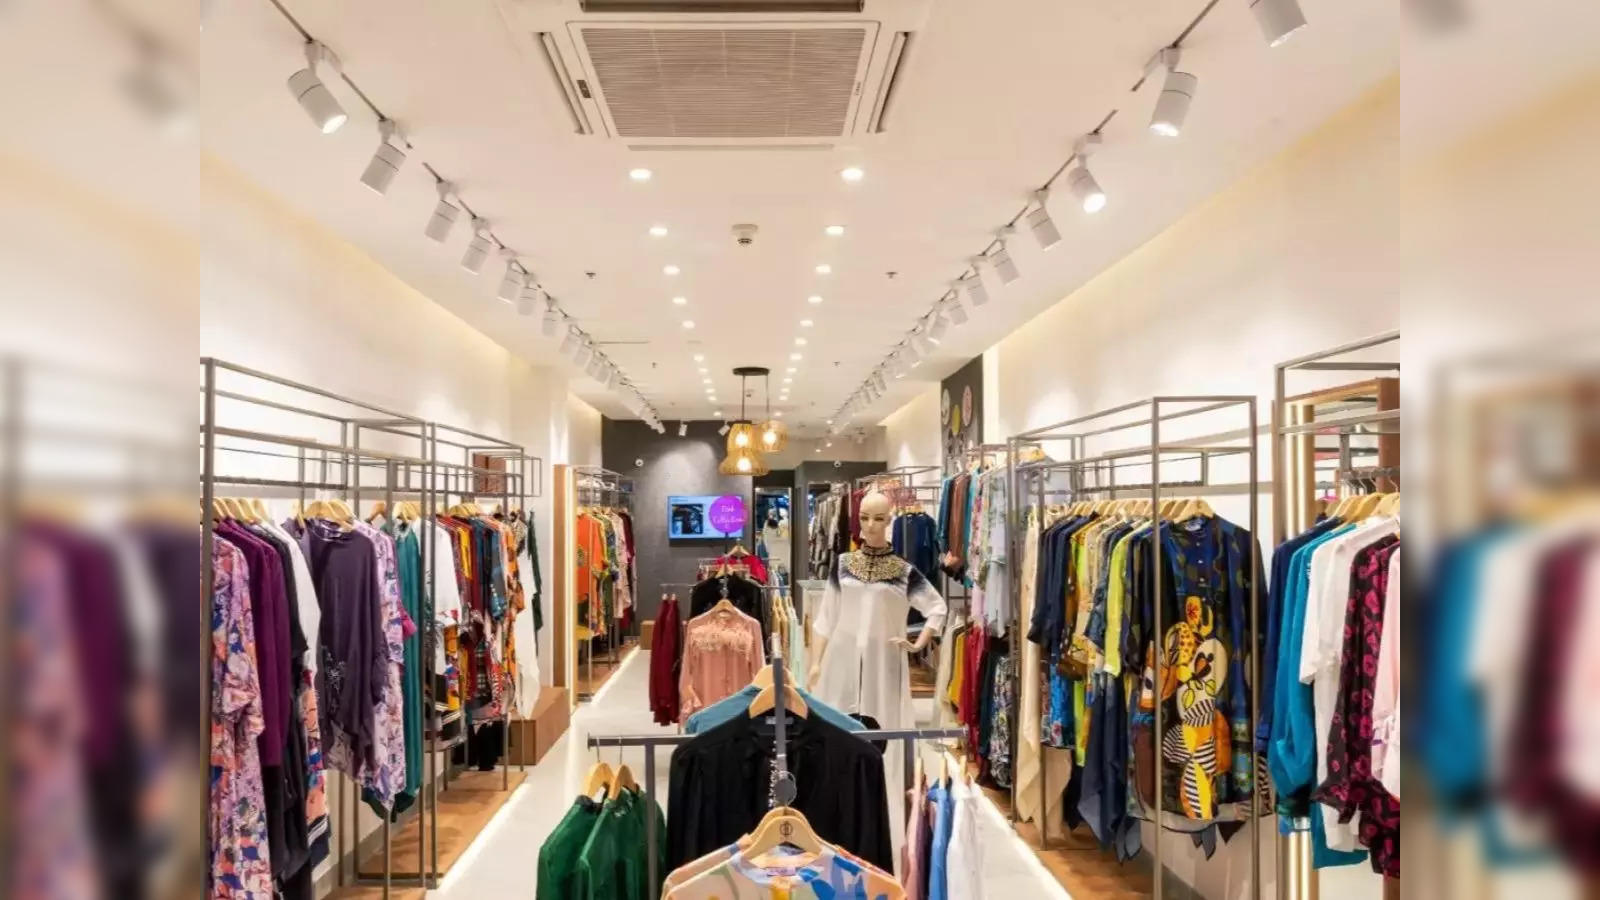 Top global apparel brands and retailers doubled sales in India